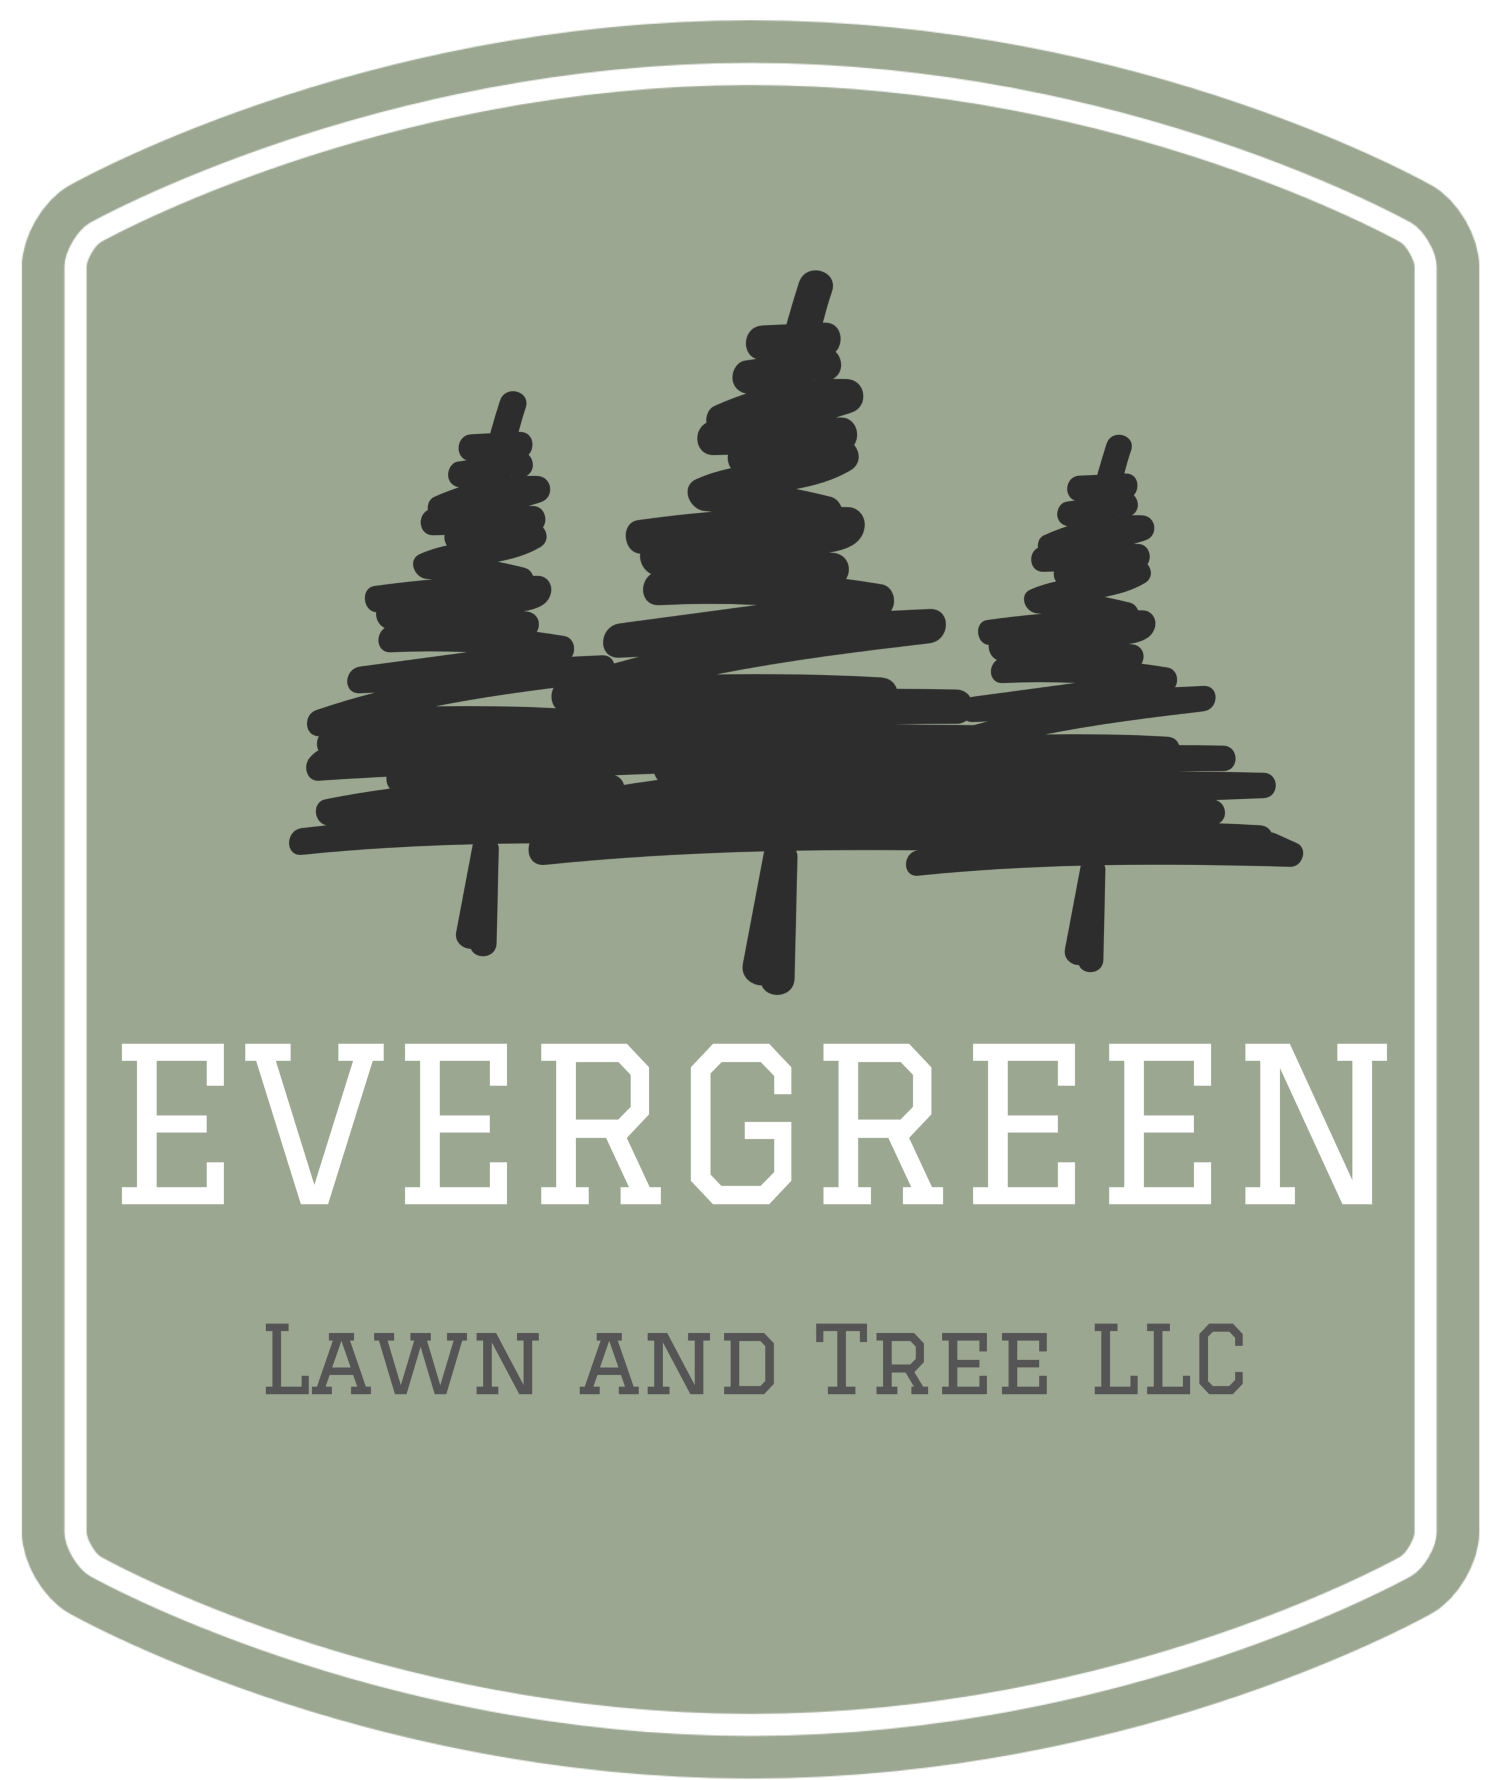 Evergreen Lawn and Tree